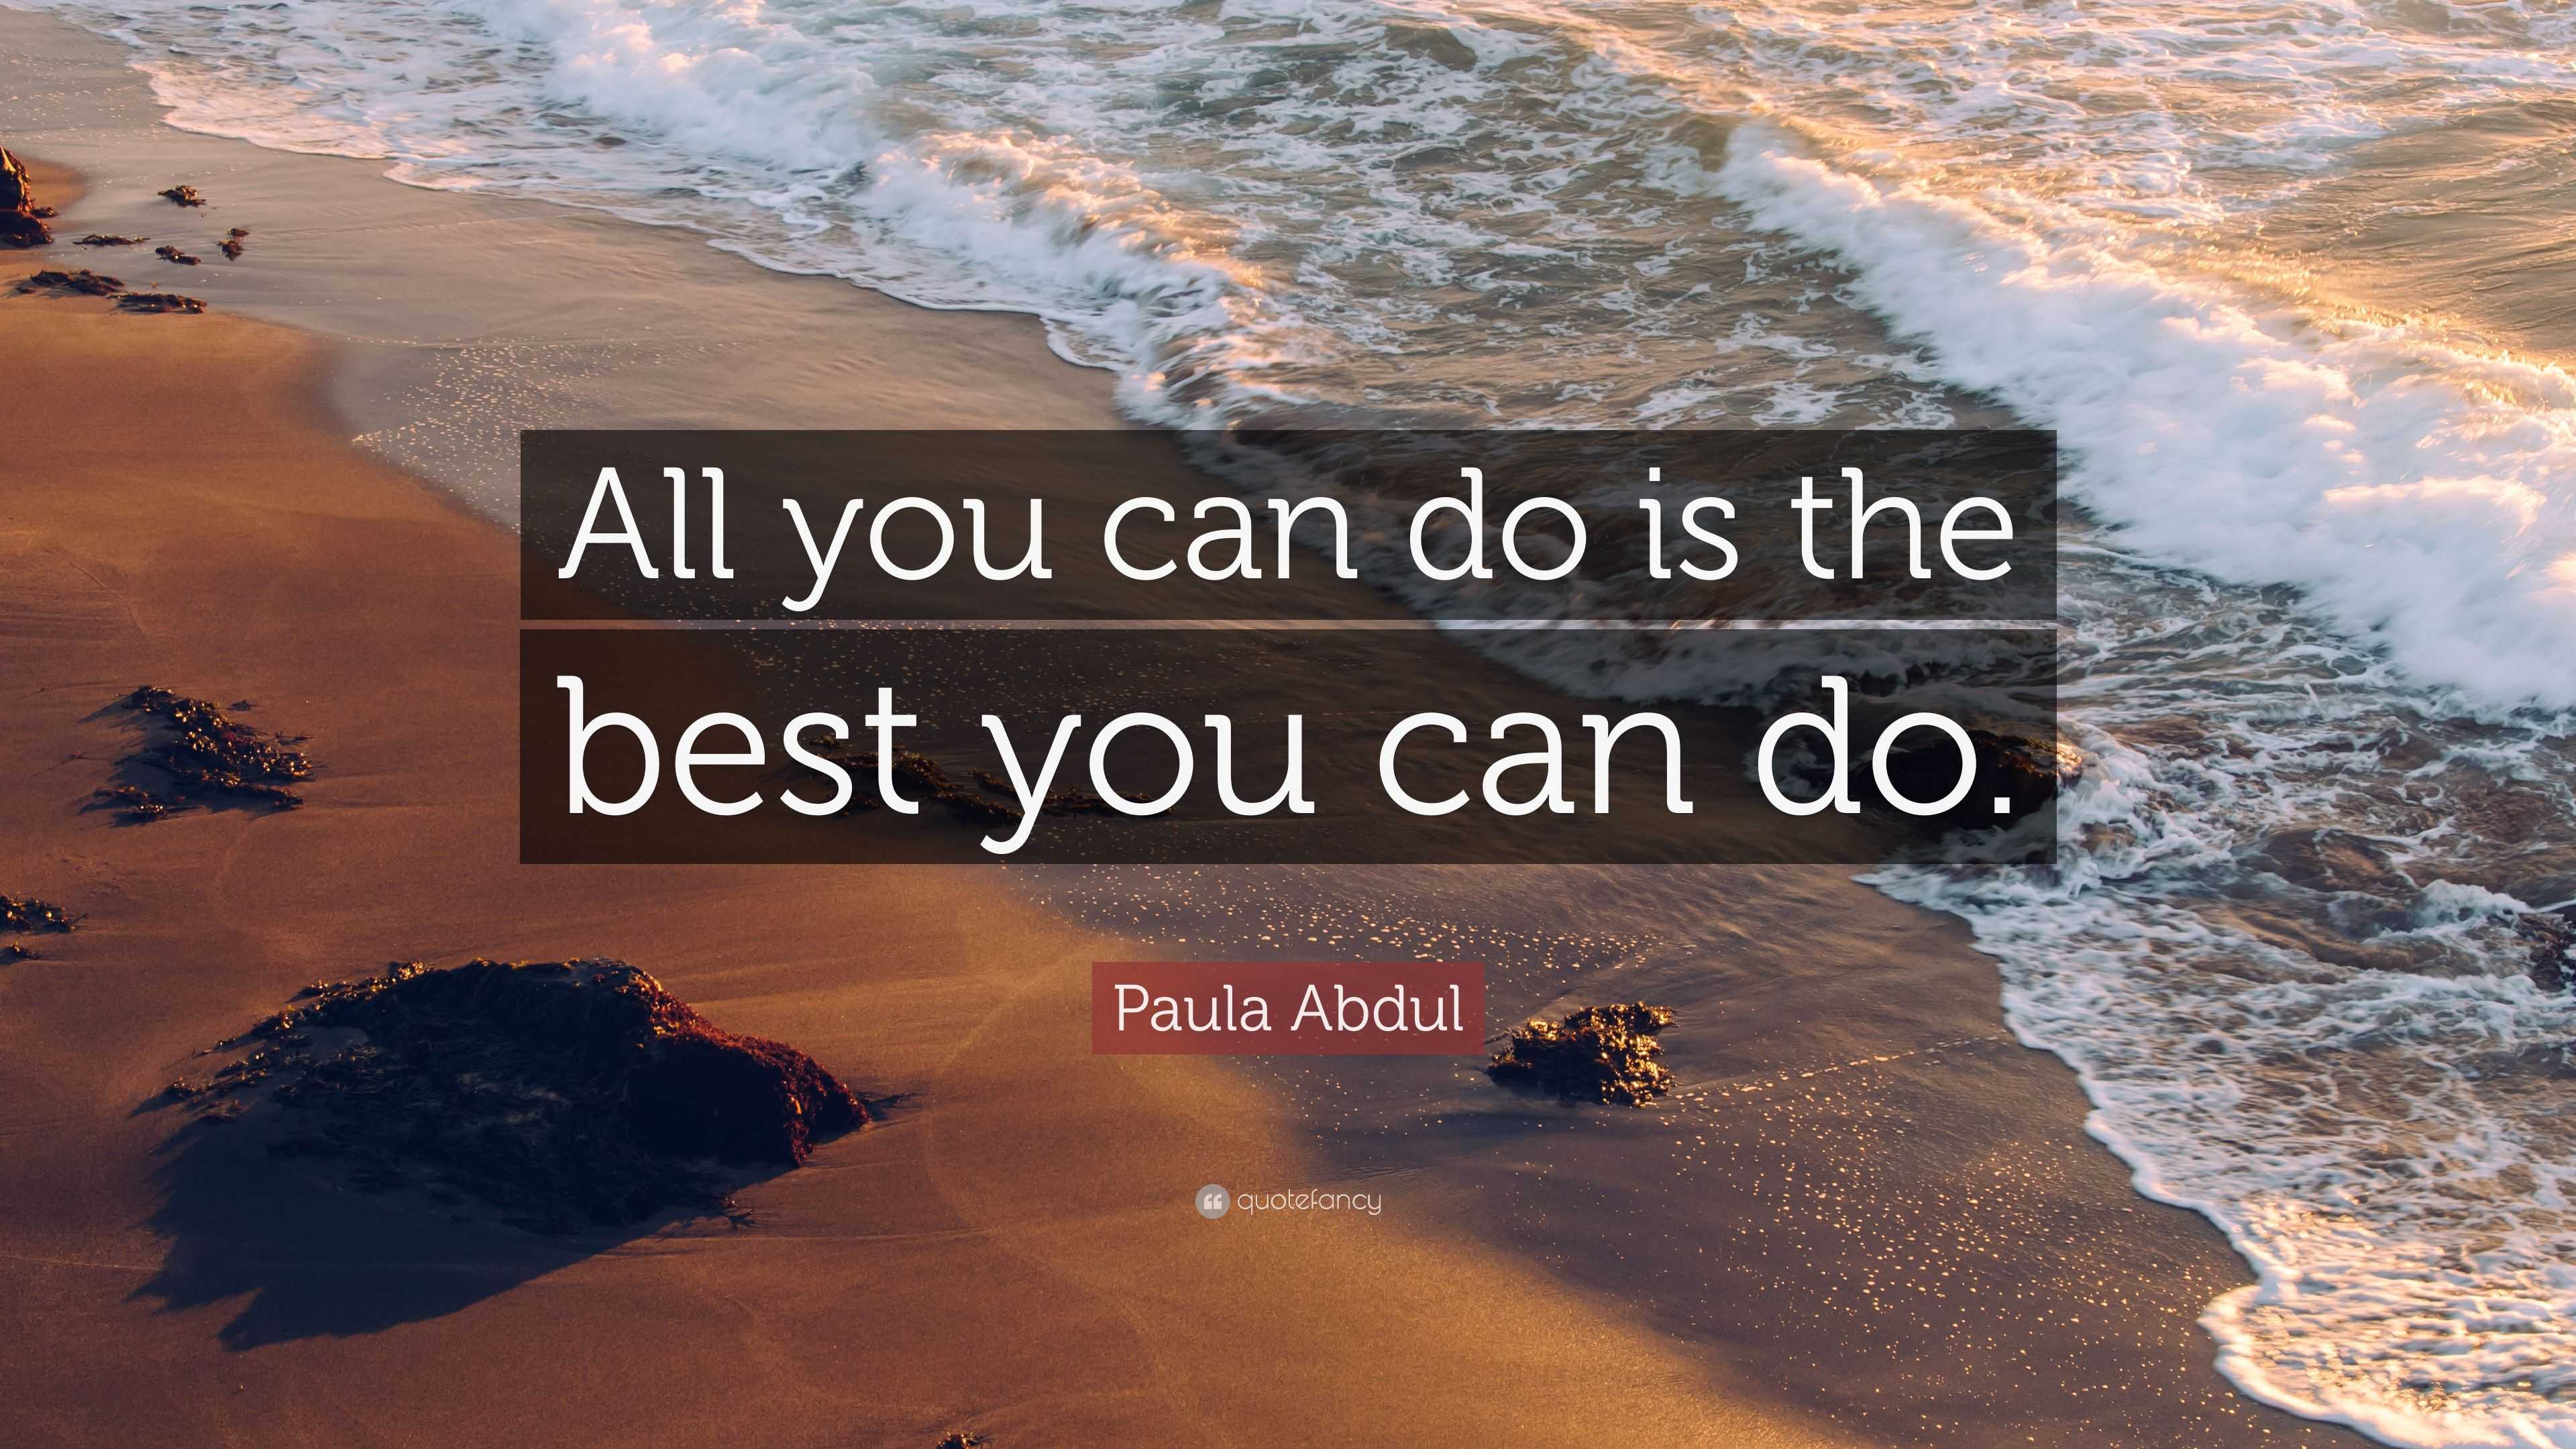 Paula Abdul Quote “all You Can Do Is The Best You Can Do” 